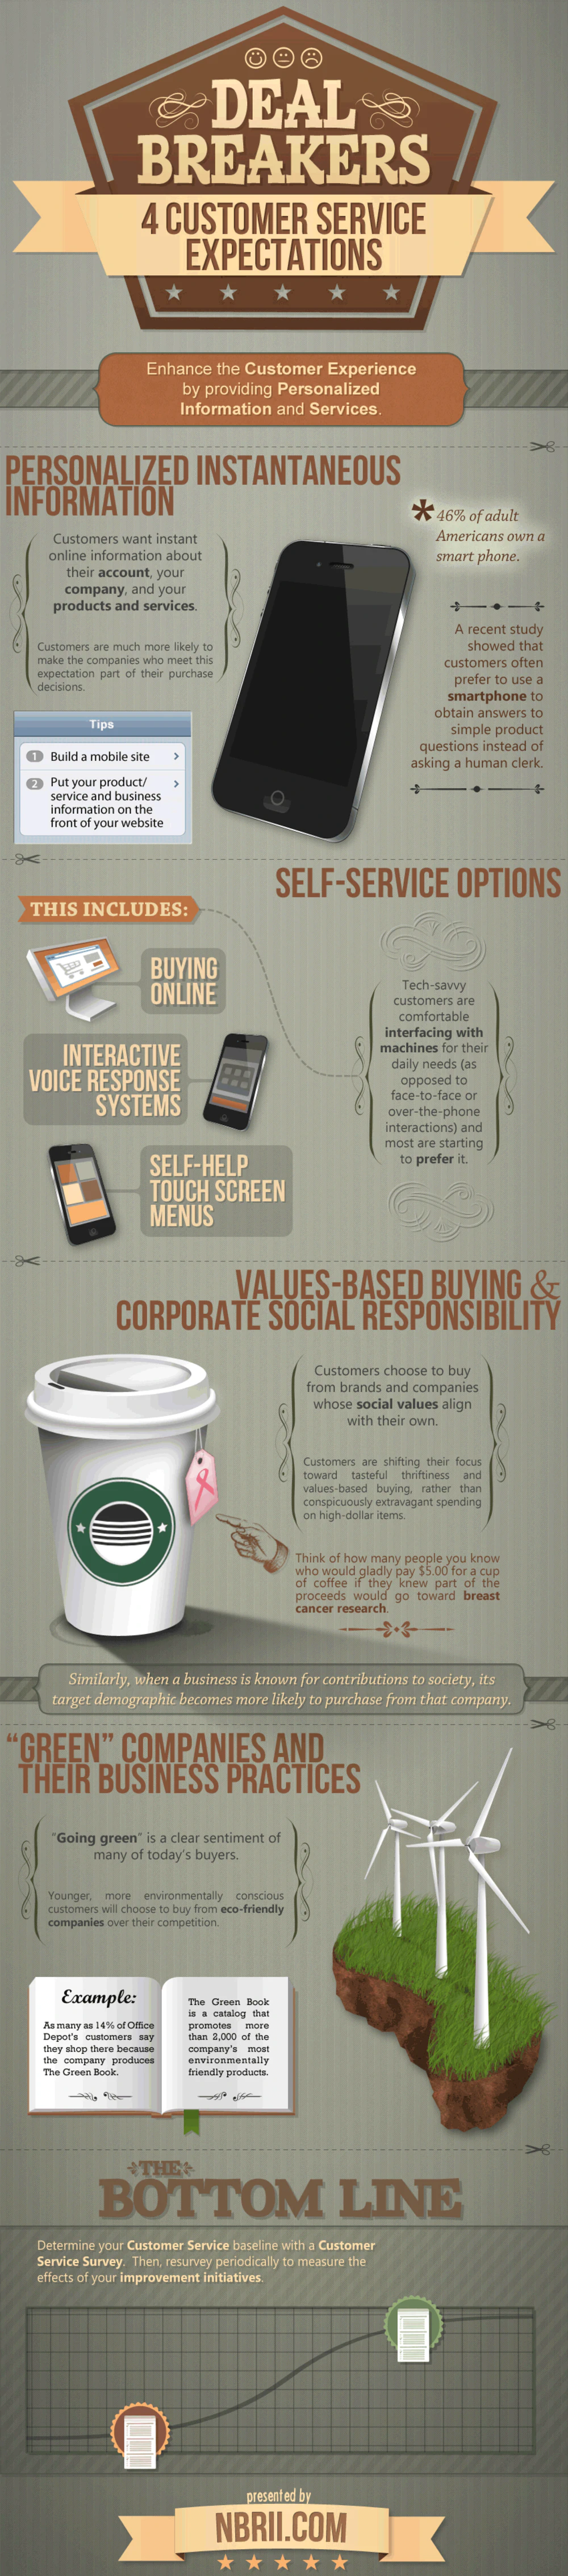 Customer Service Trends infographic